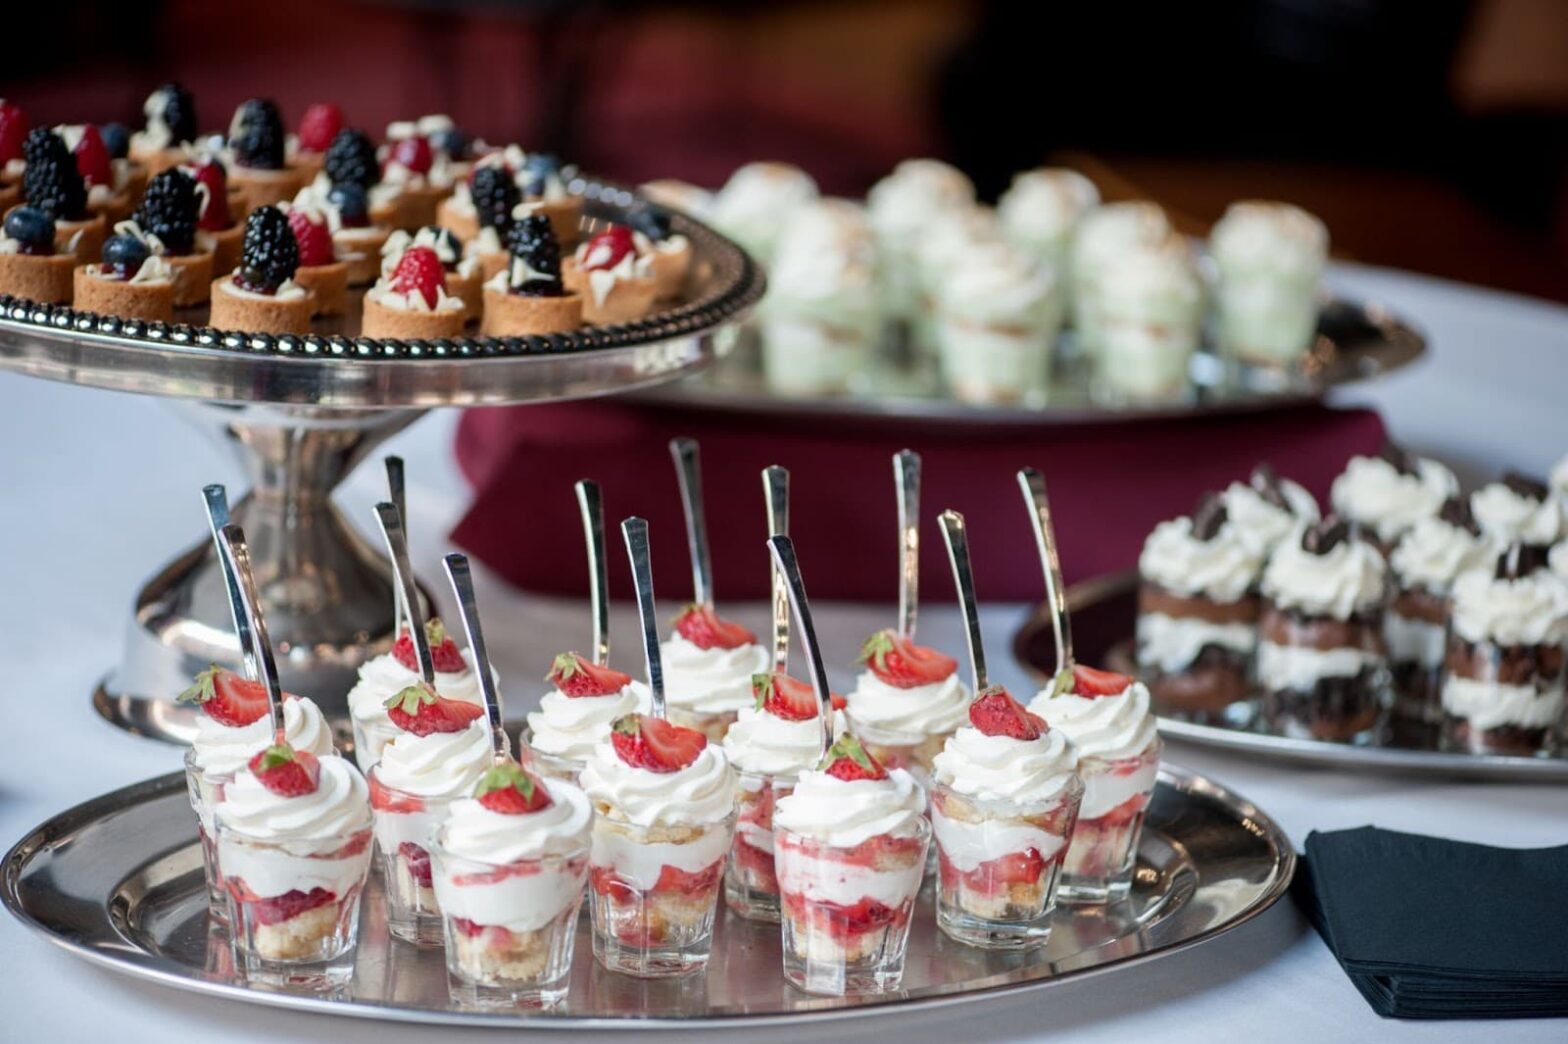 Catering Dessert bites for an event